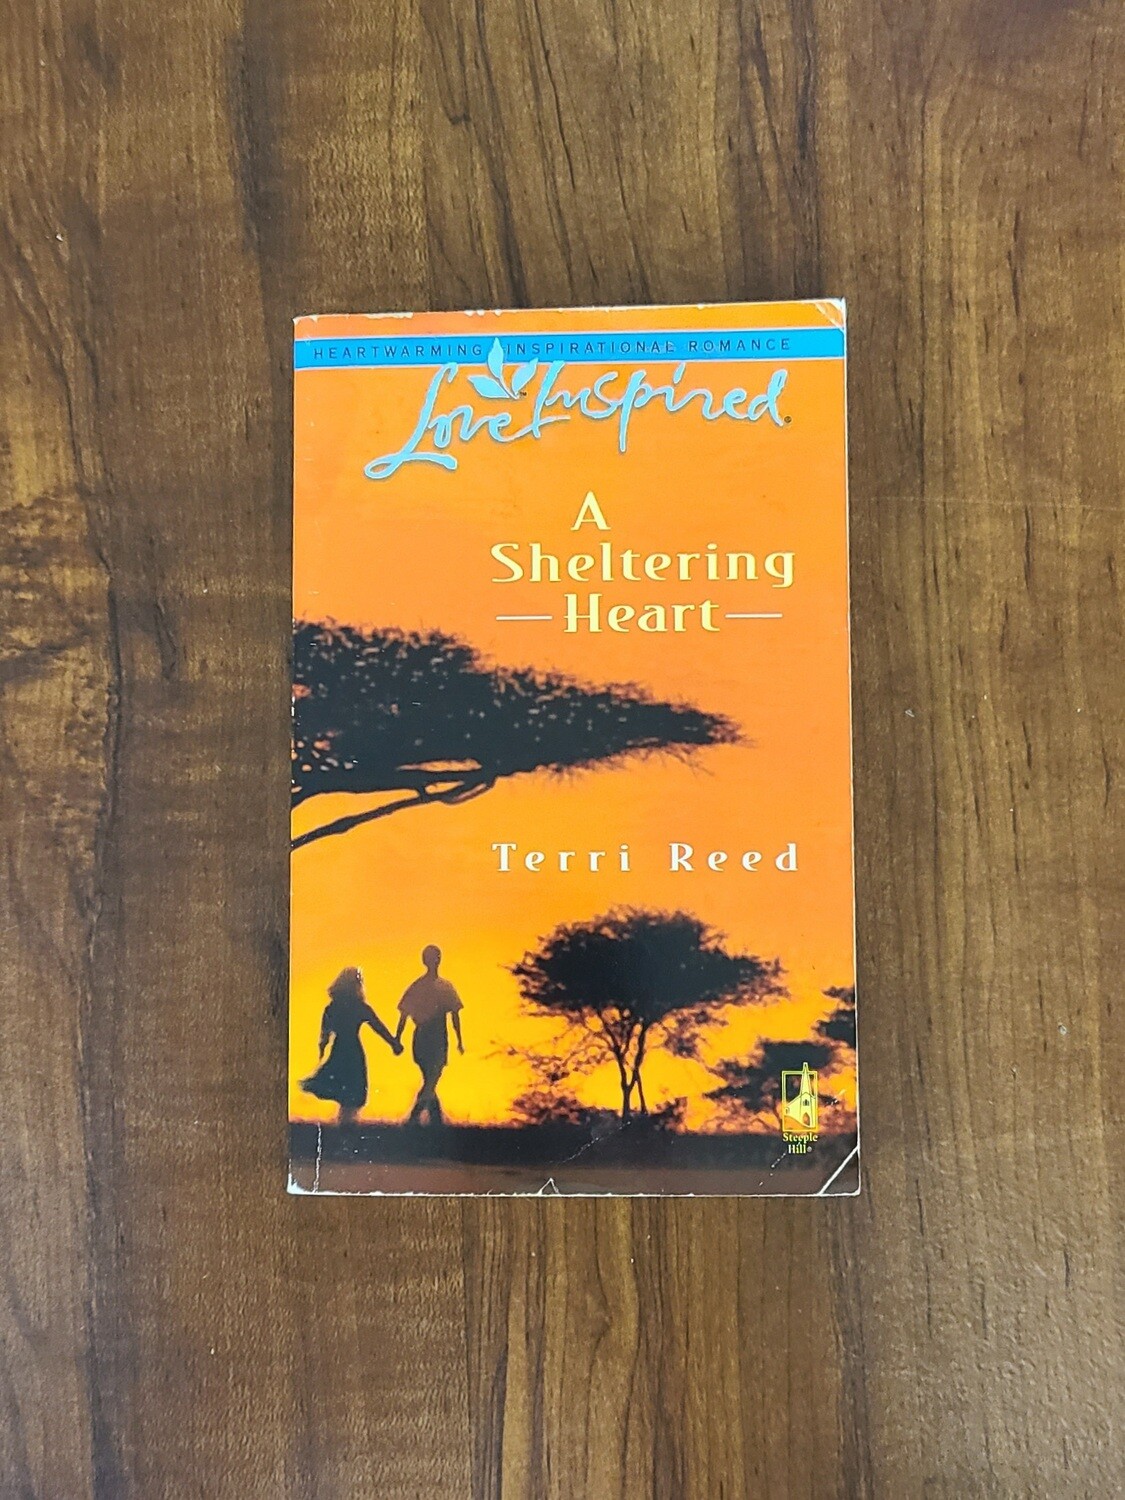 A Sheltering Heart by Terri Reed